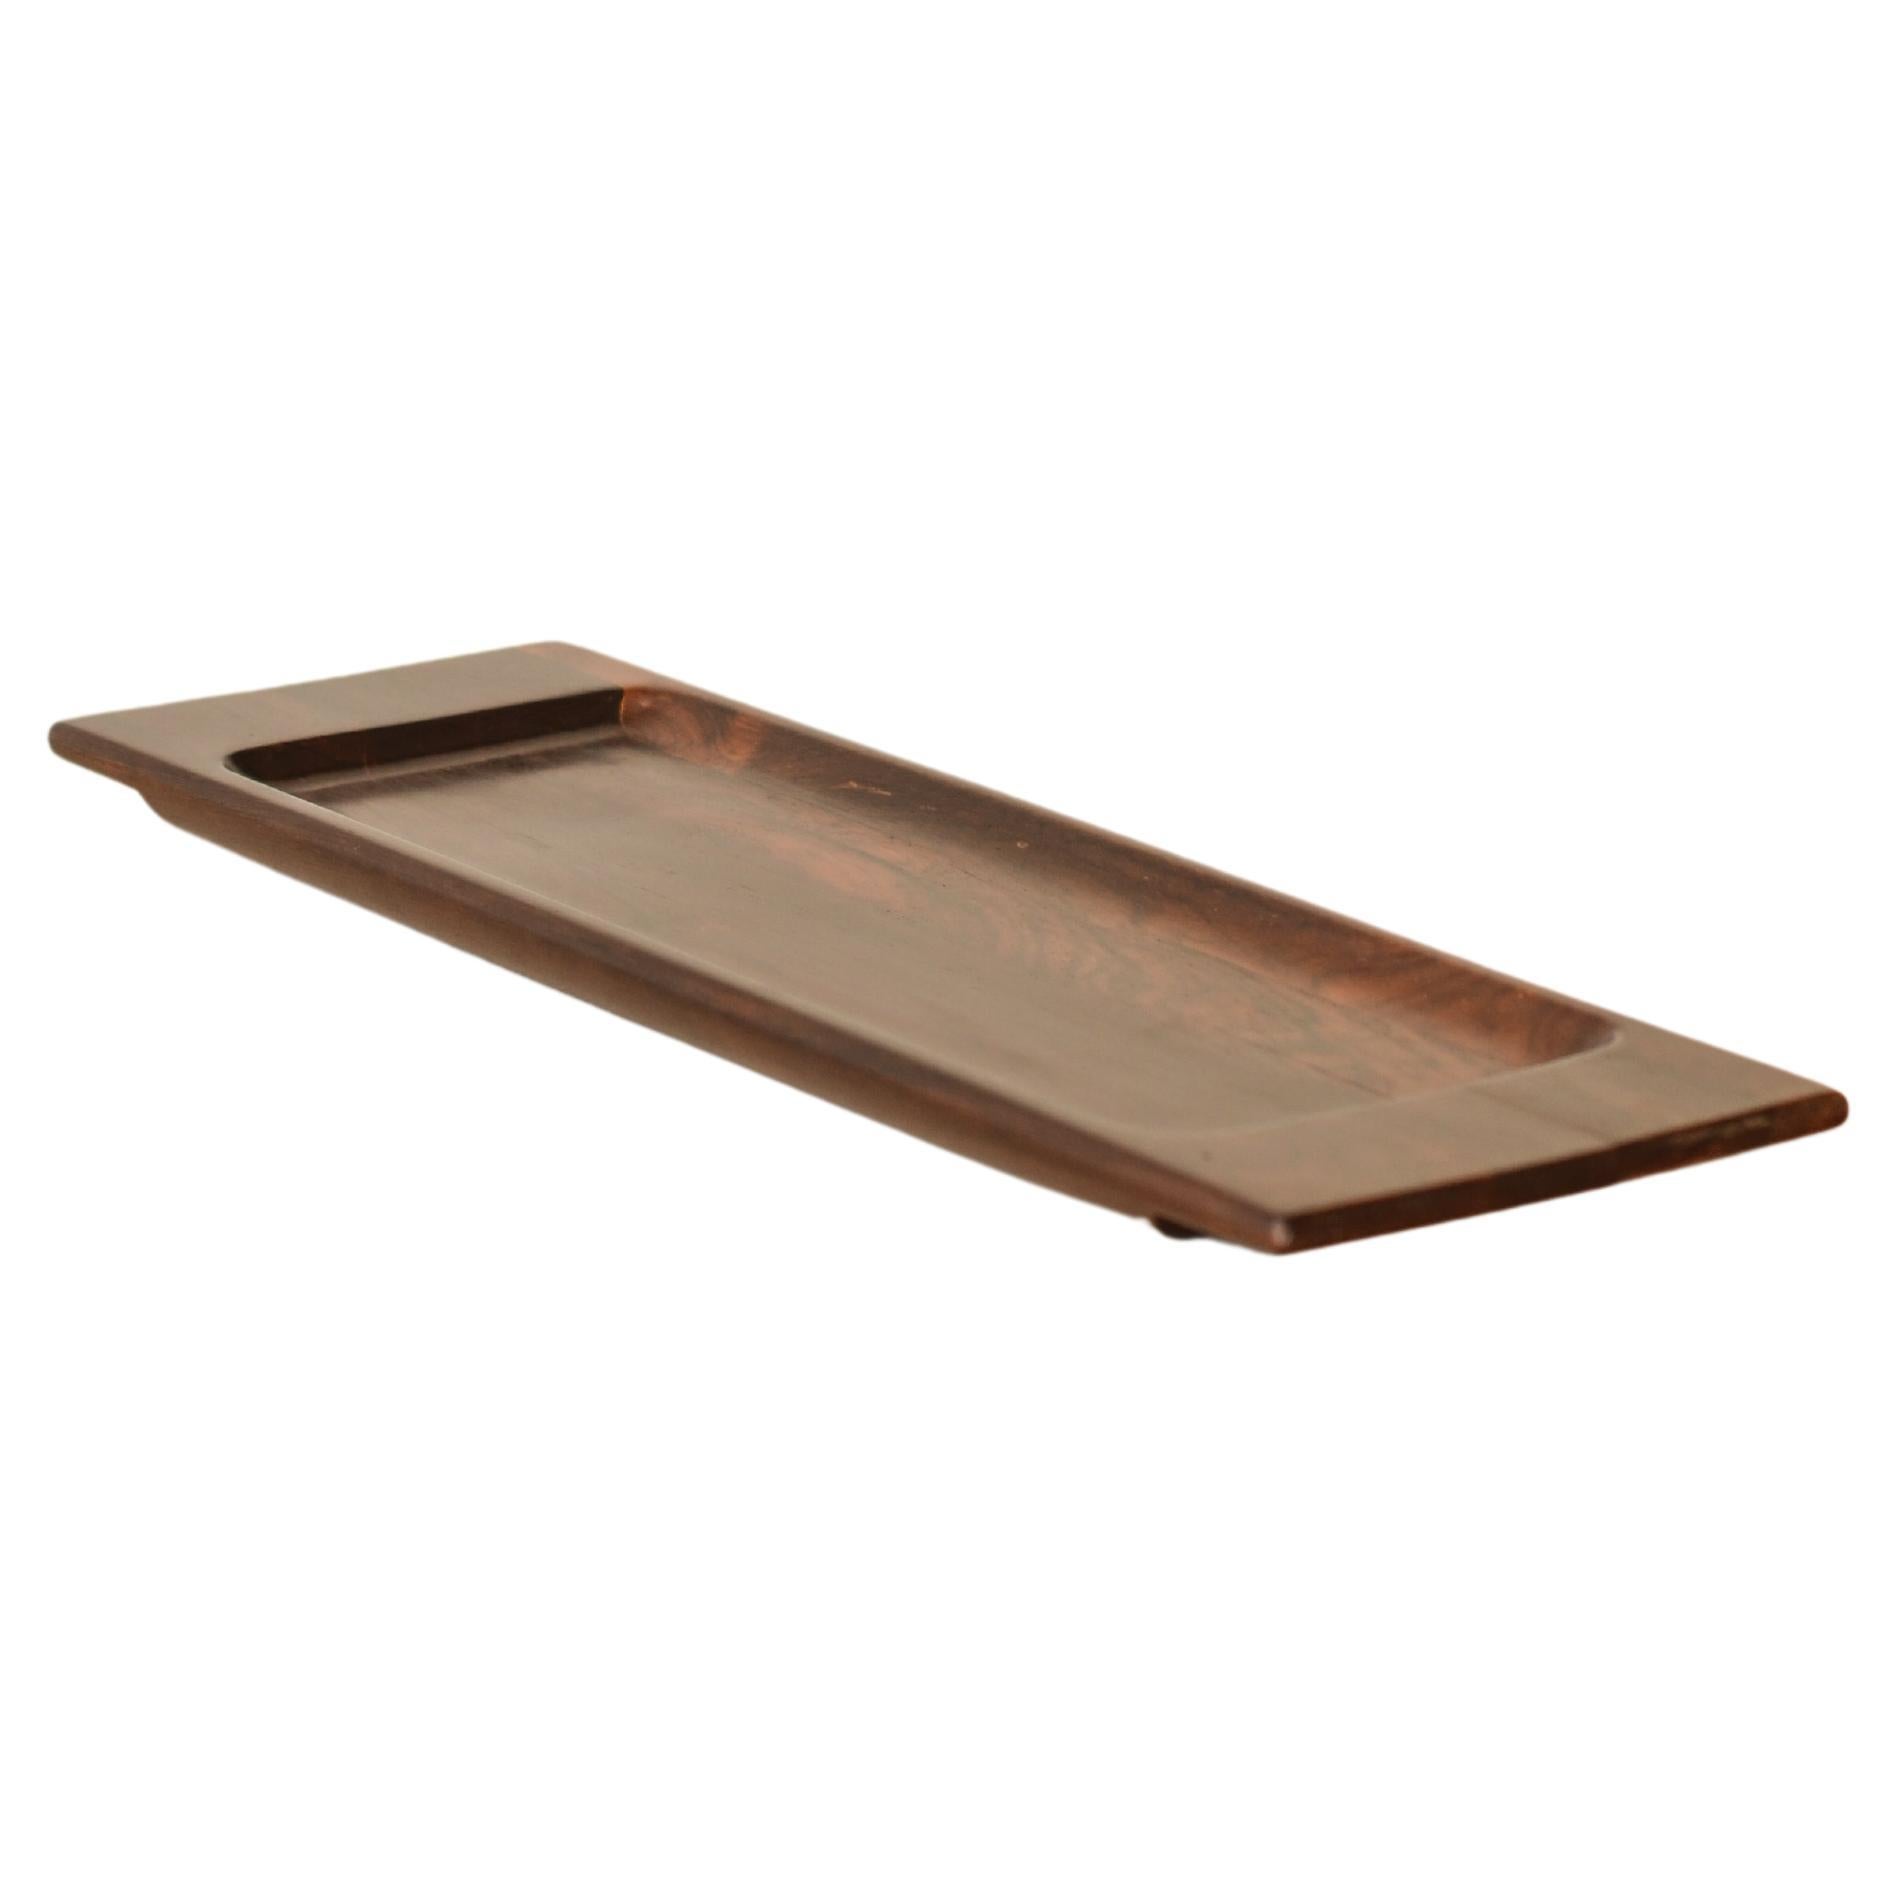 Brazilian Midcentury Tray #701 in Rosewood by Jean Gillon for WoodArt For Sale